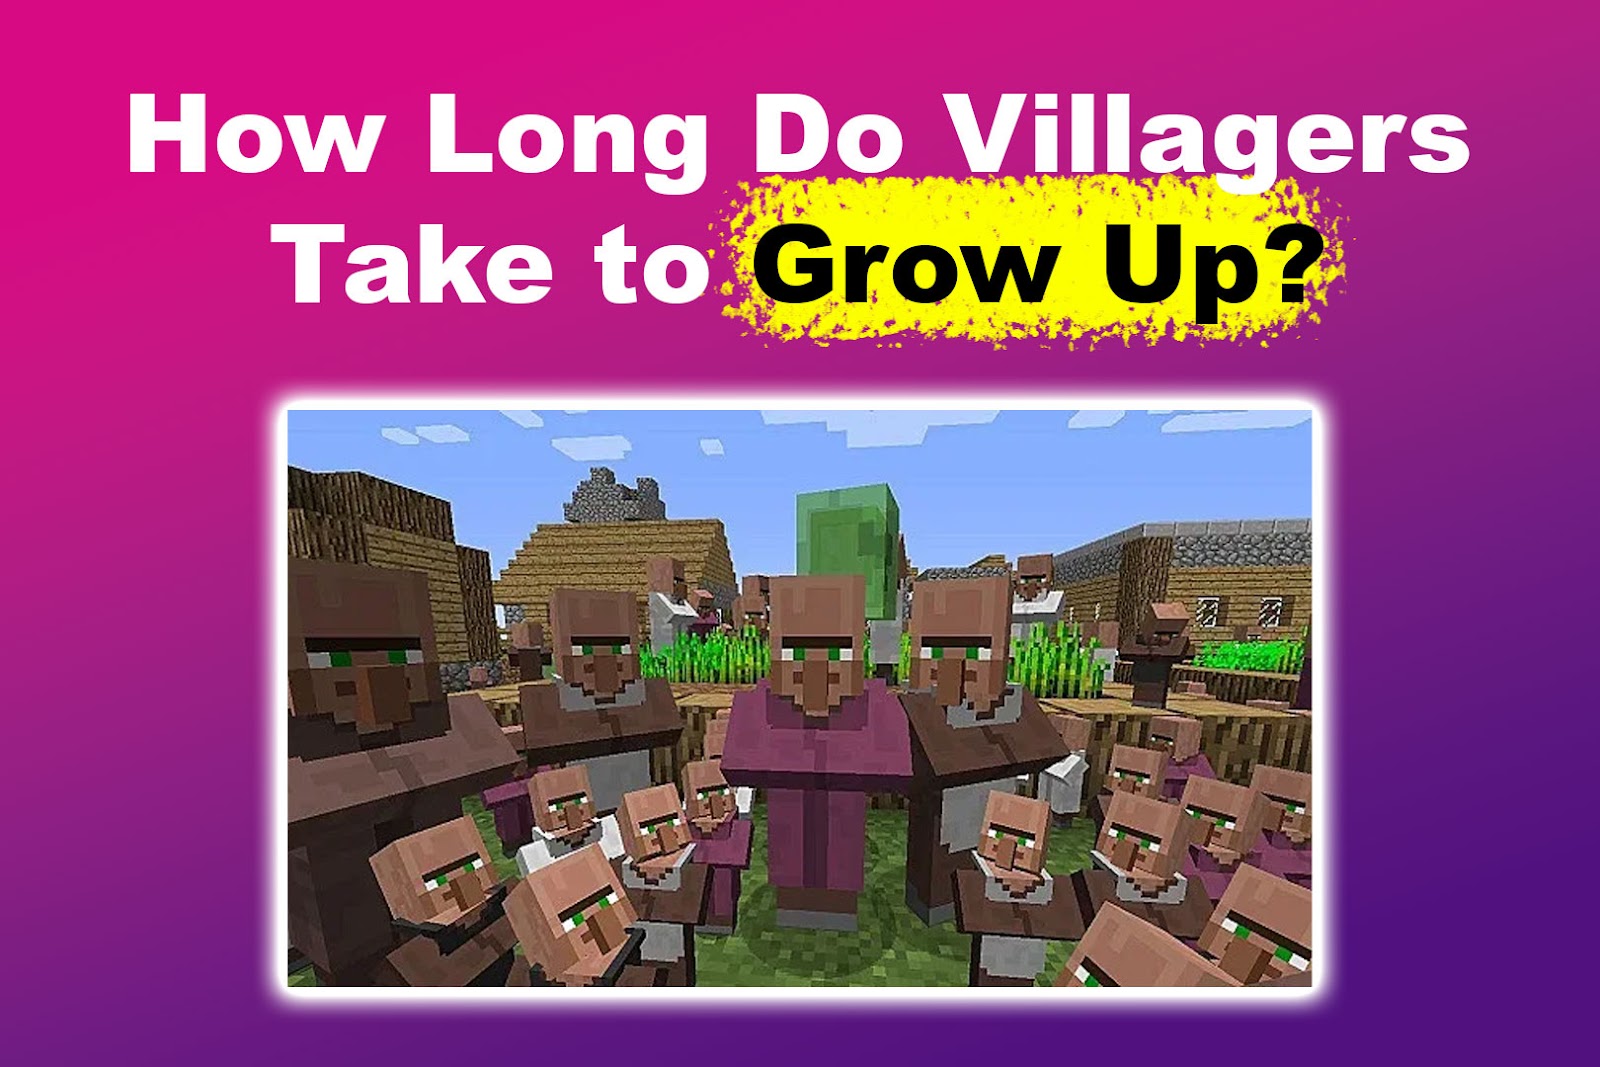 How Long Do Villagers Take to Grow Up